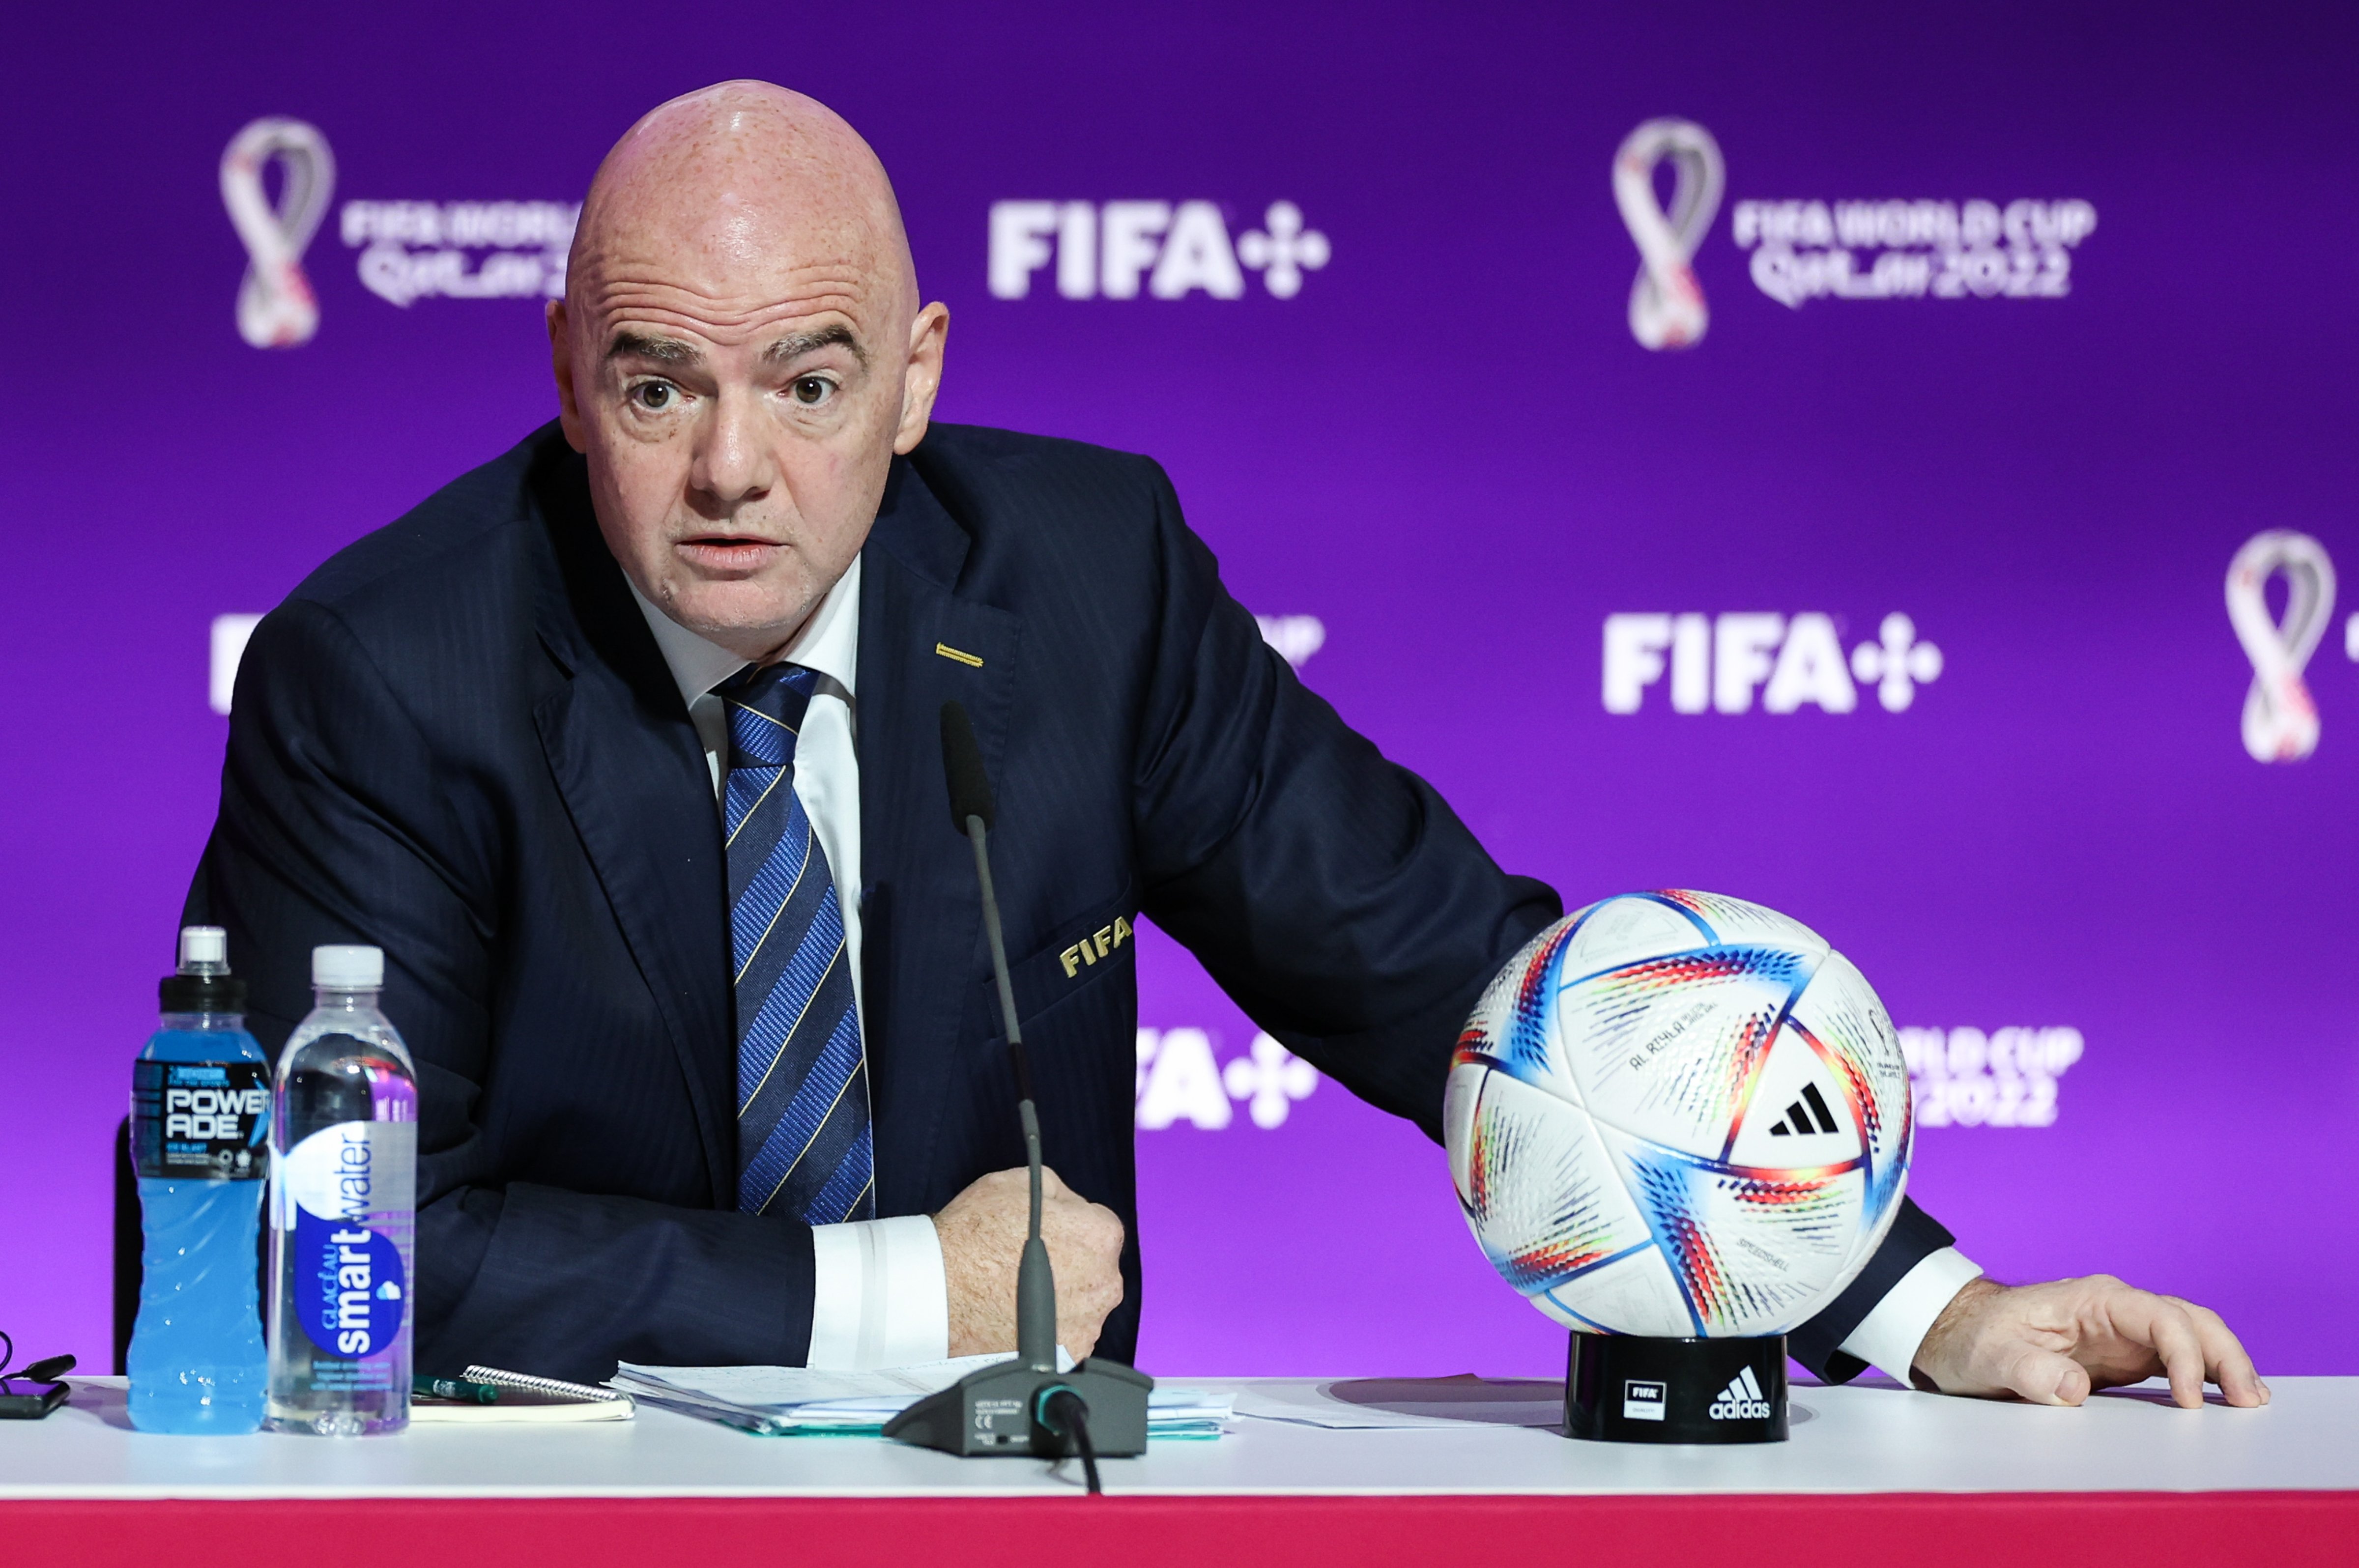 FIFA President Gianni Infantino speaks during a press conference at the Main Media Centre ahead of the FIFA World Cup 2022 on November 19, 2022 in Doha, Qatar. (iu Lu/VCG—Getty Images)